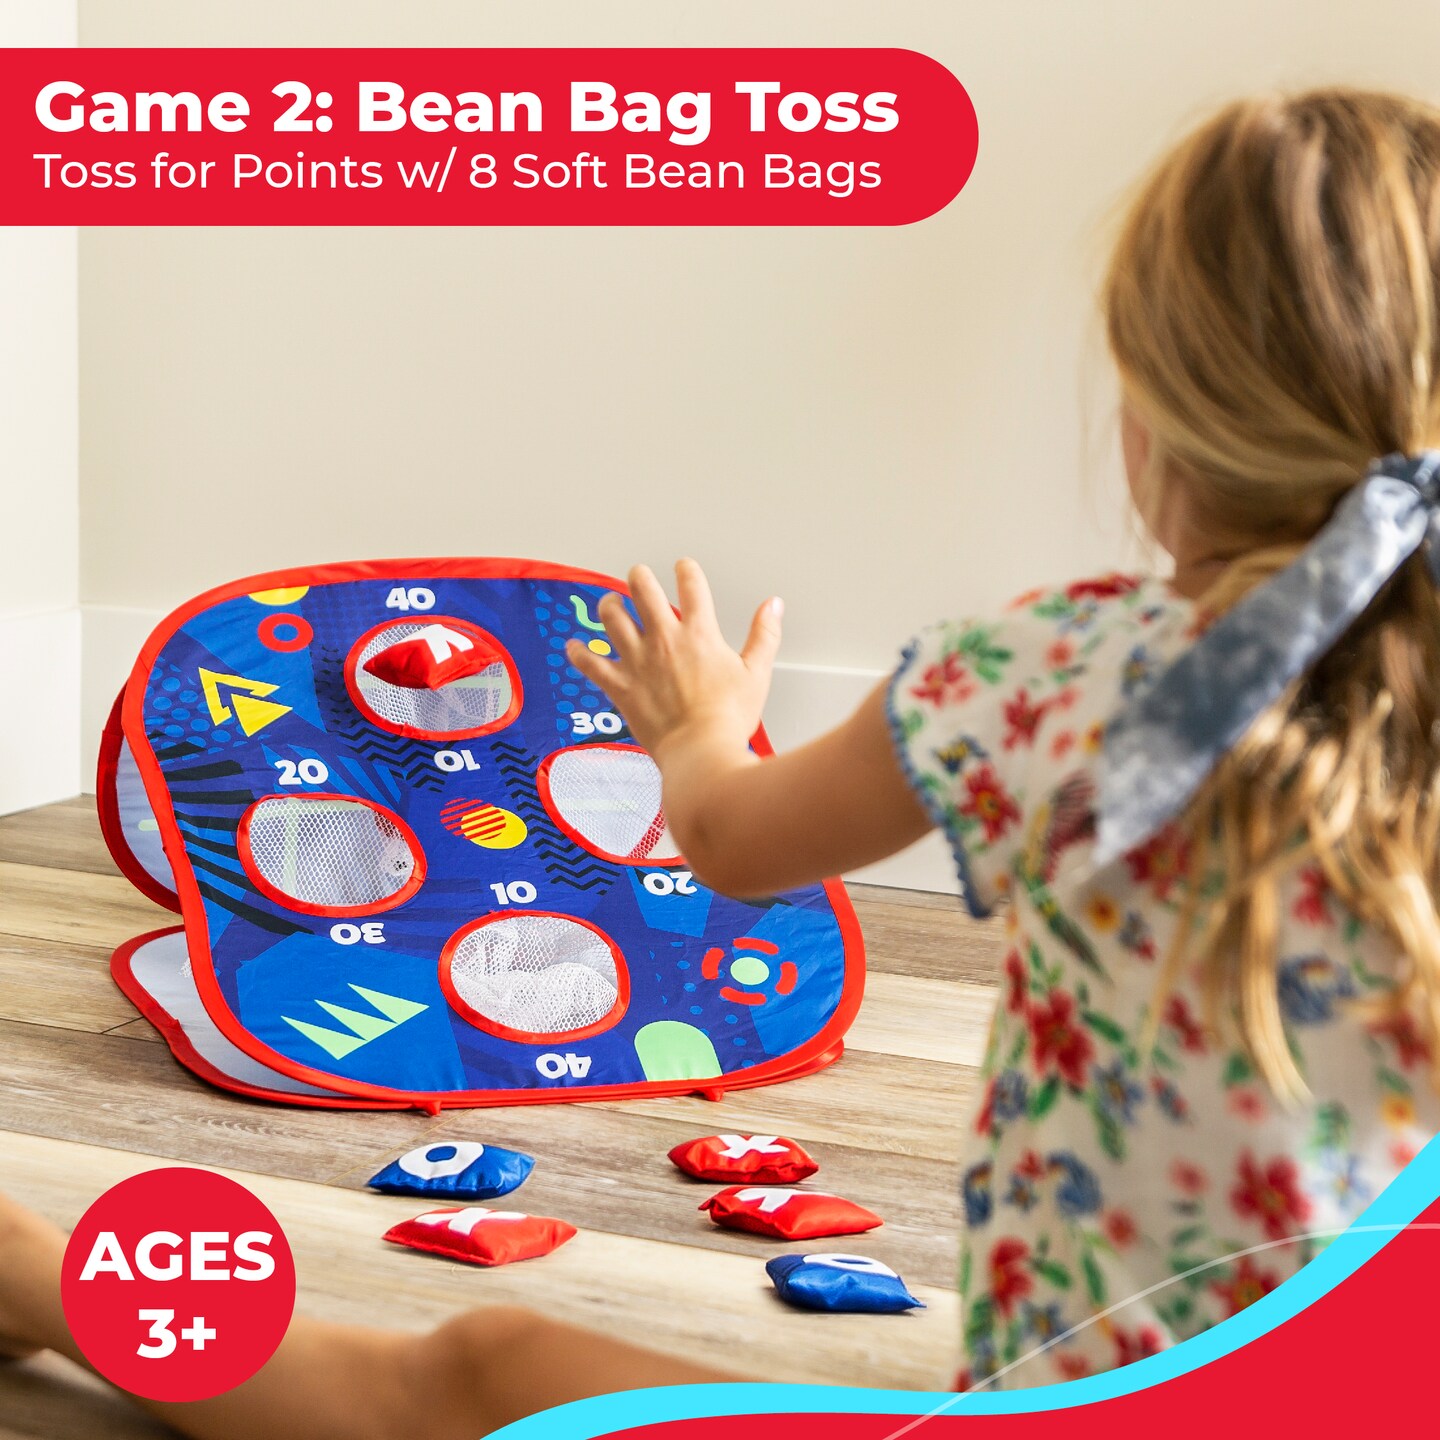 USA Toyz Pop n Toss Bean Bag Toss Game for Kids Toddlers- 3in1